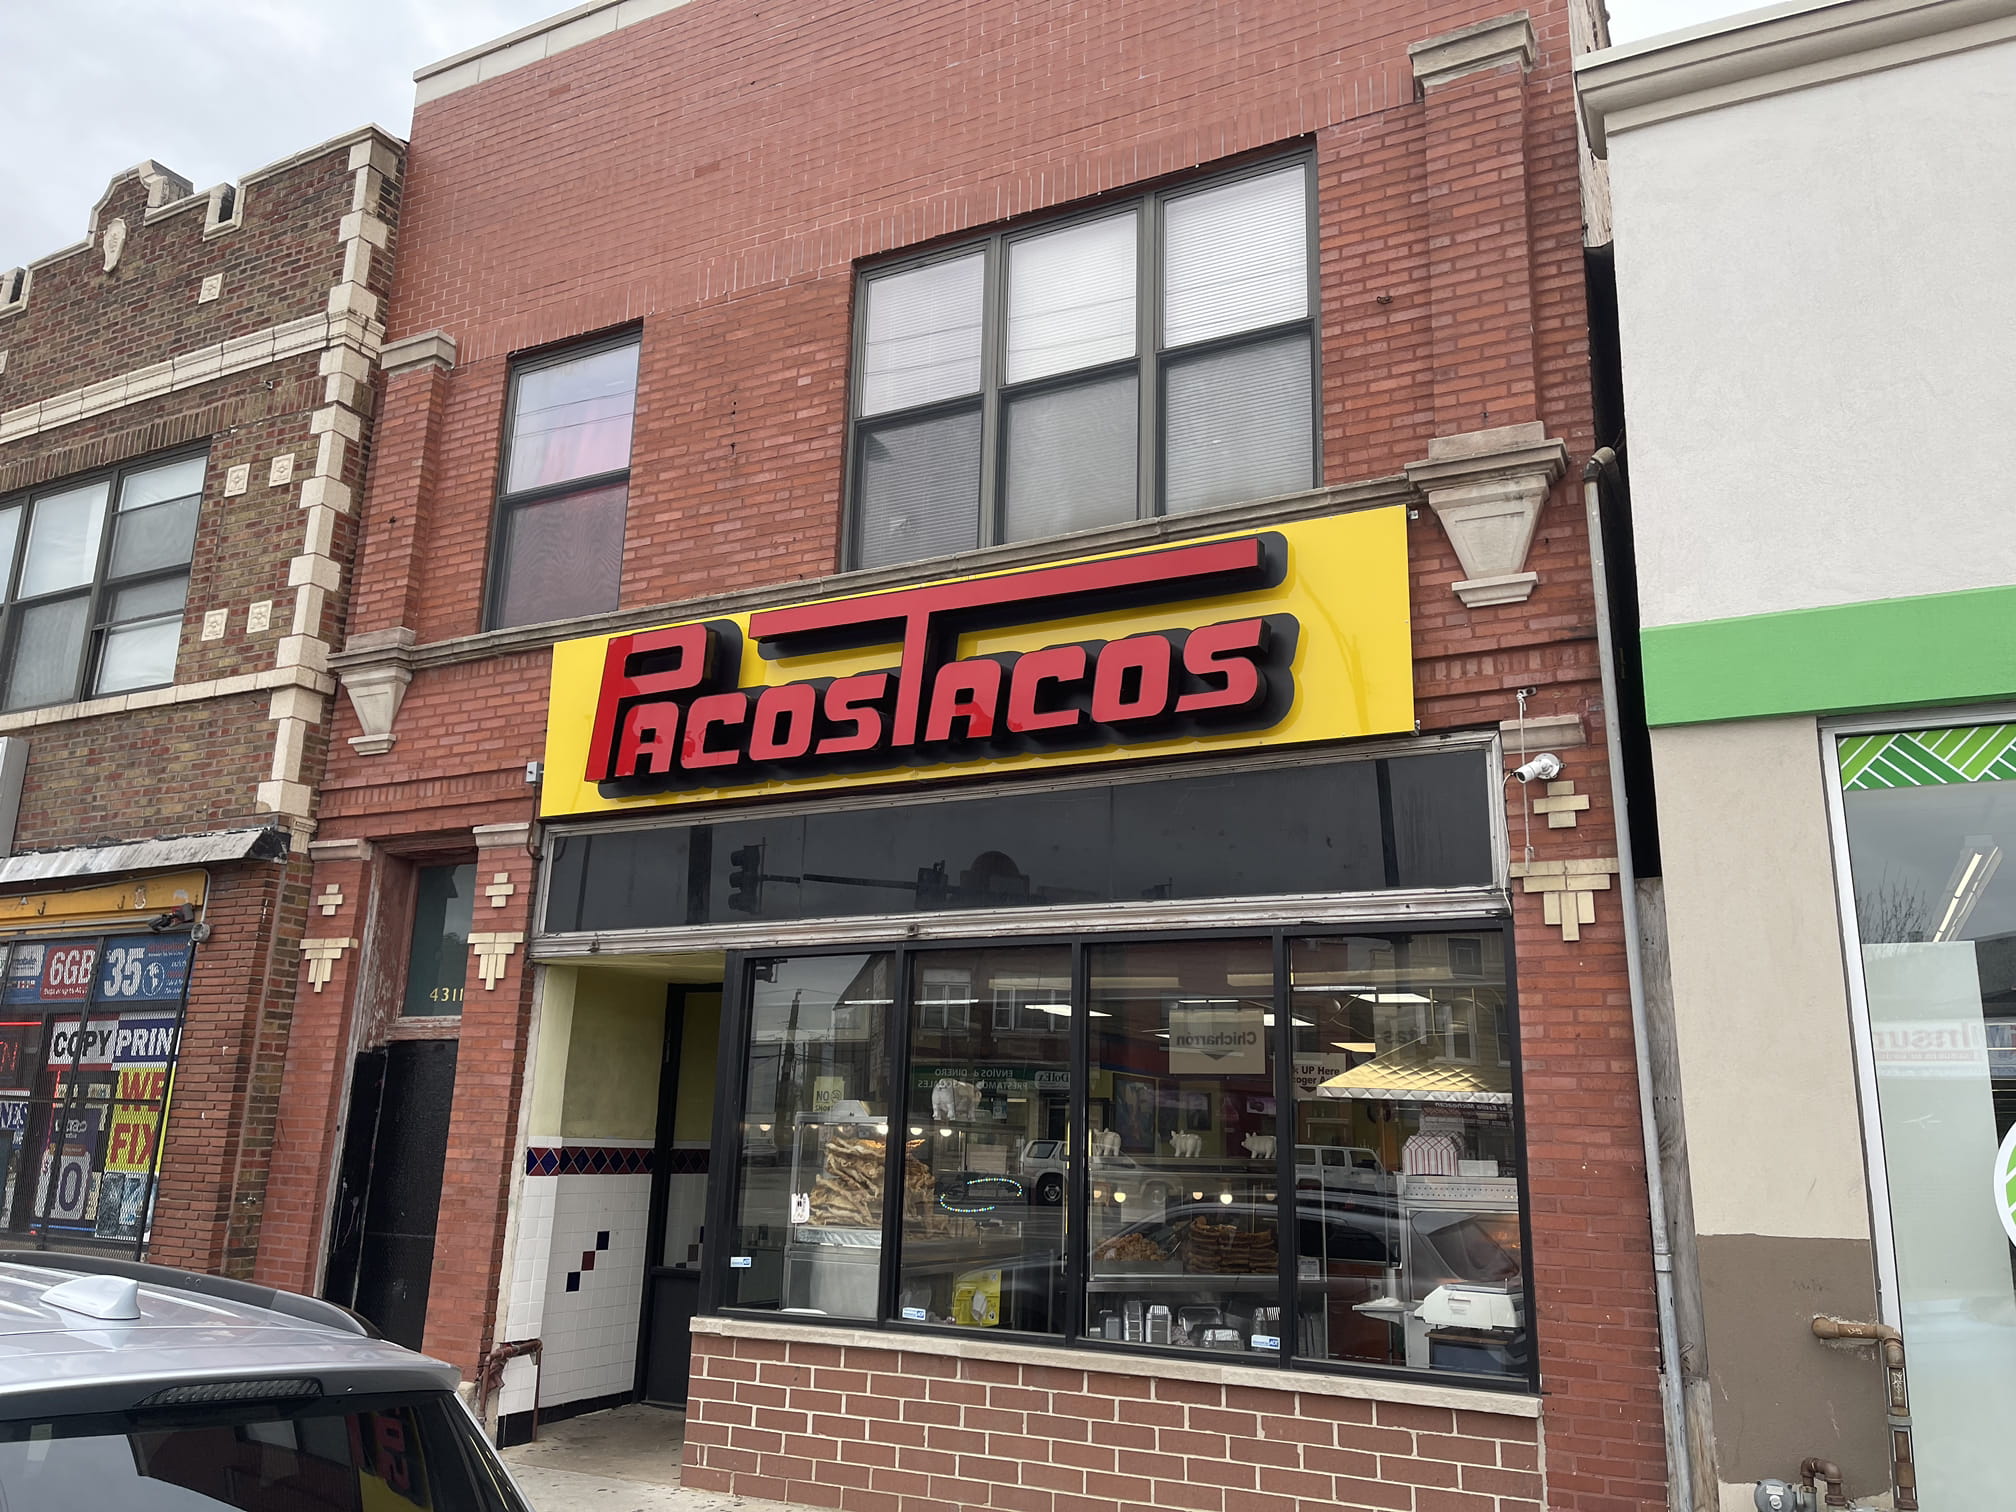 Pacos tacos sign upgrade